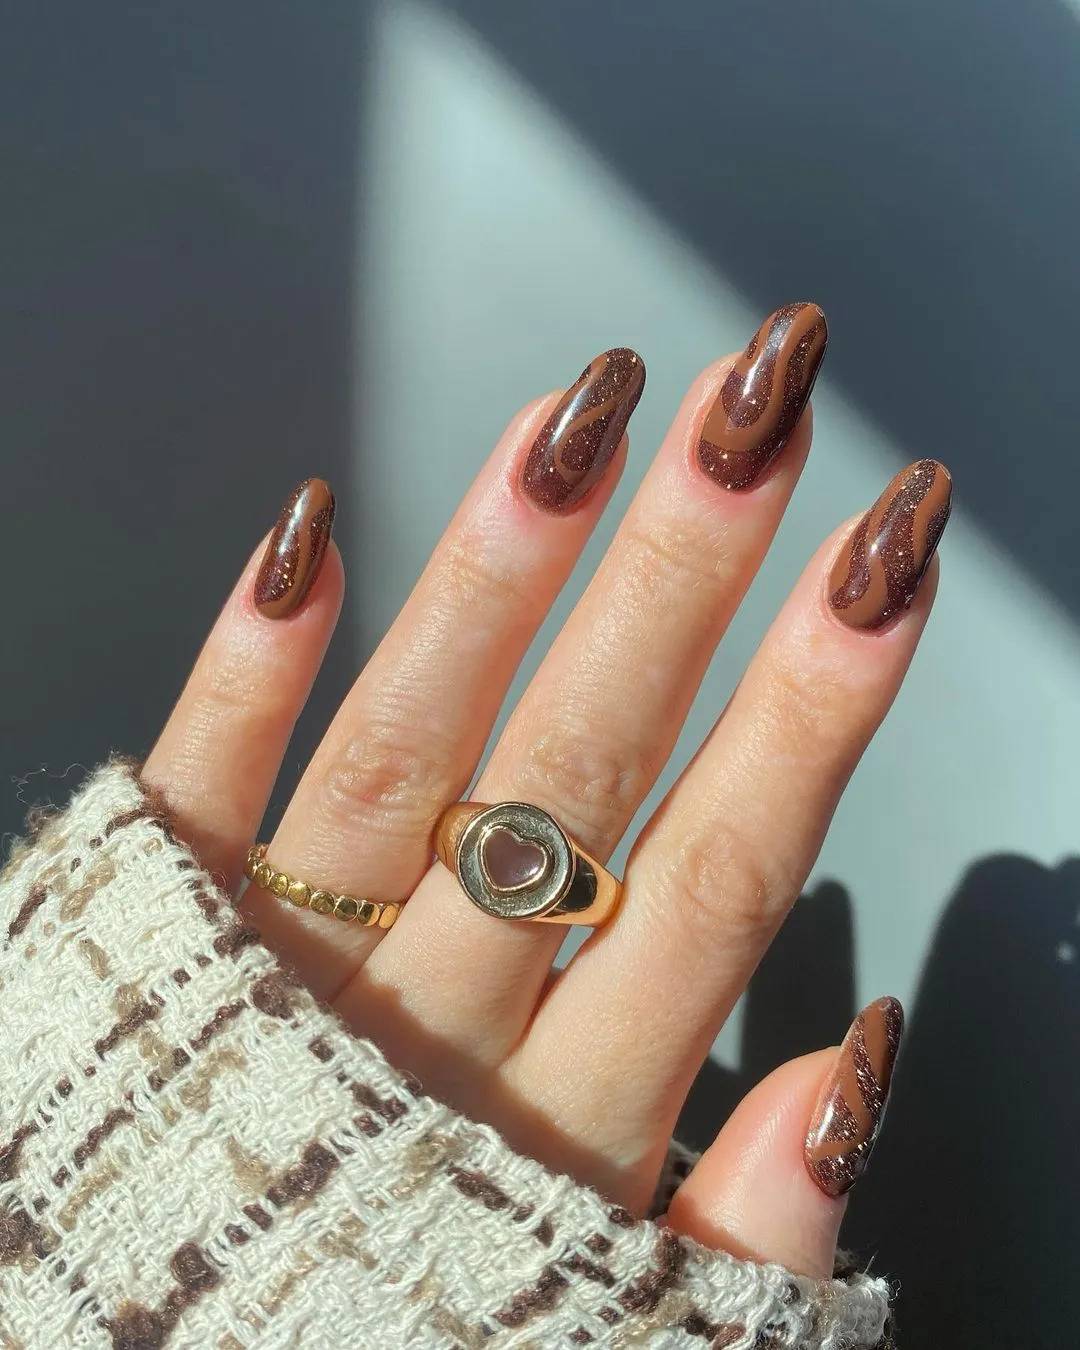 30 Autumn Nail Designs Too Chic To Resist - 213